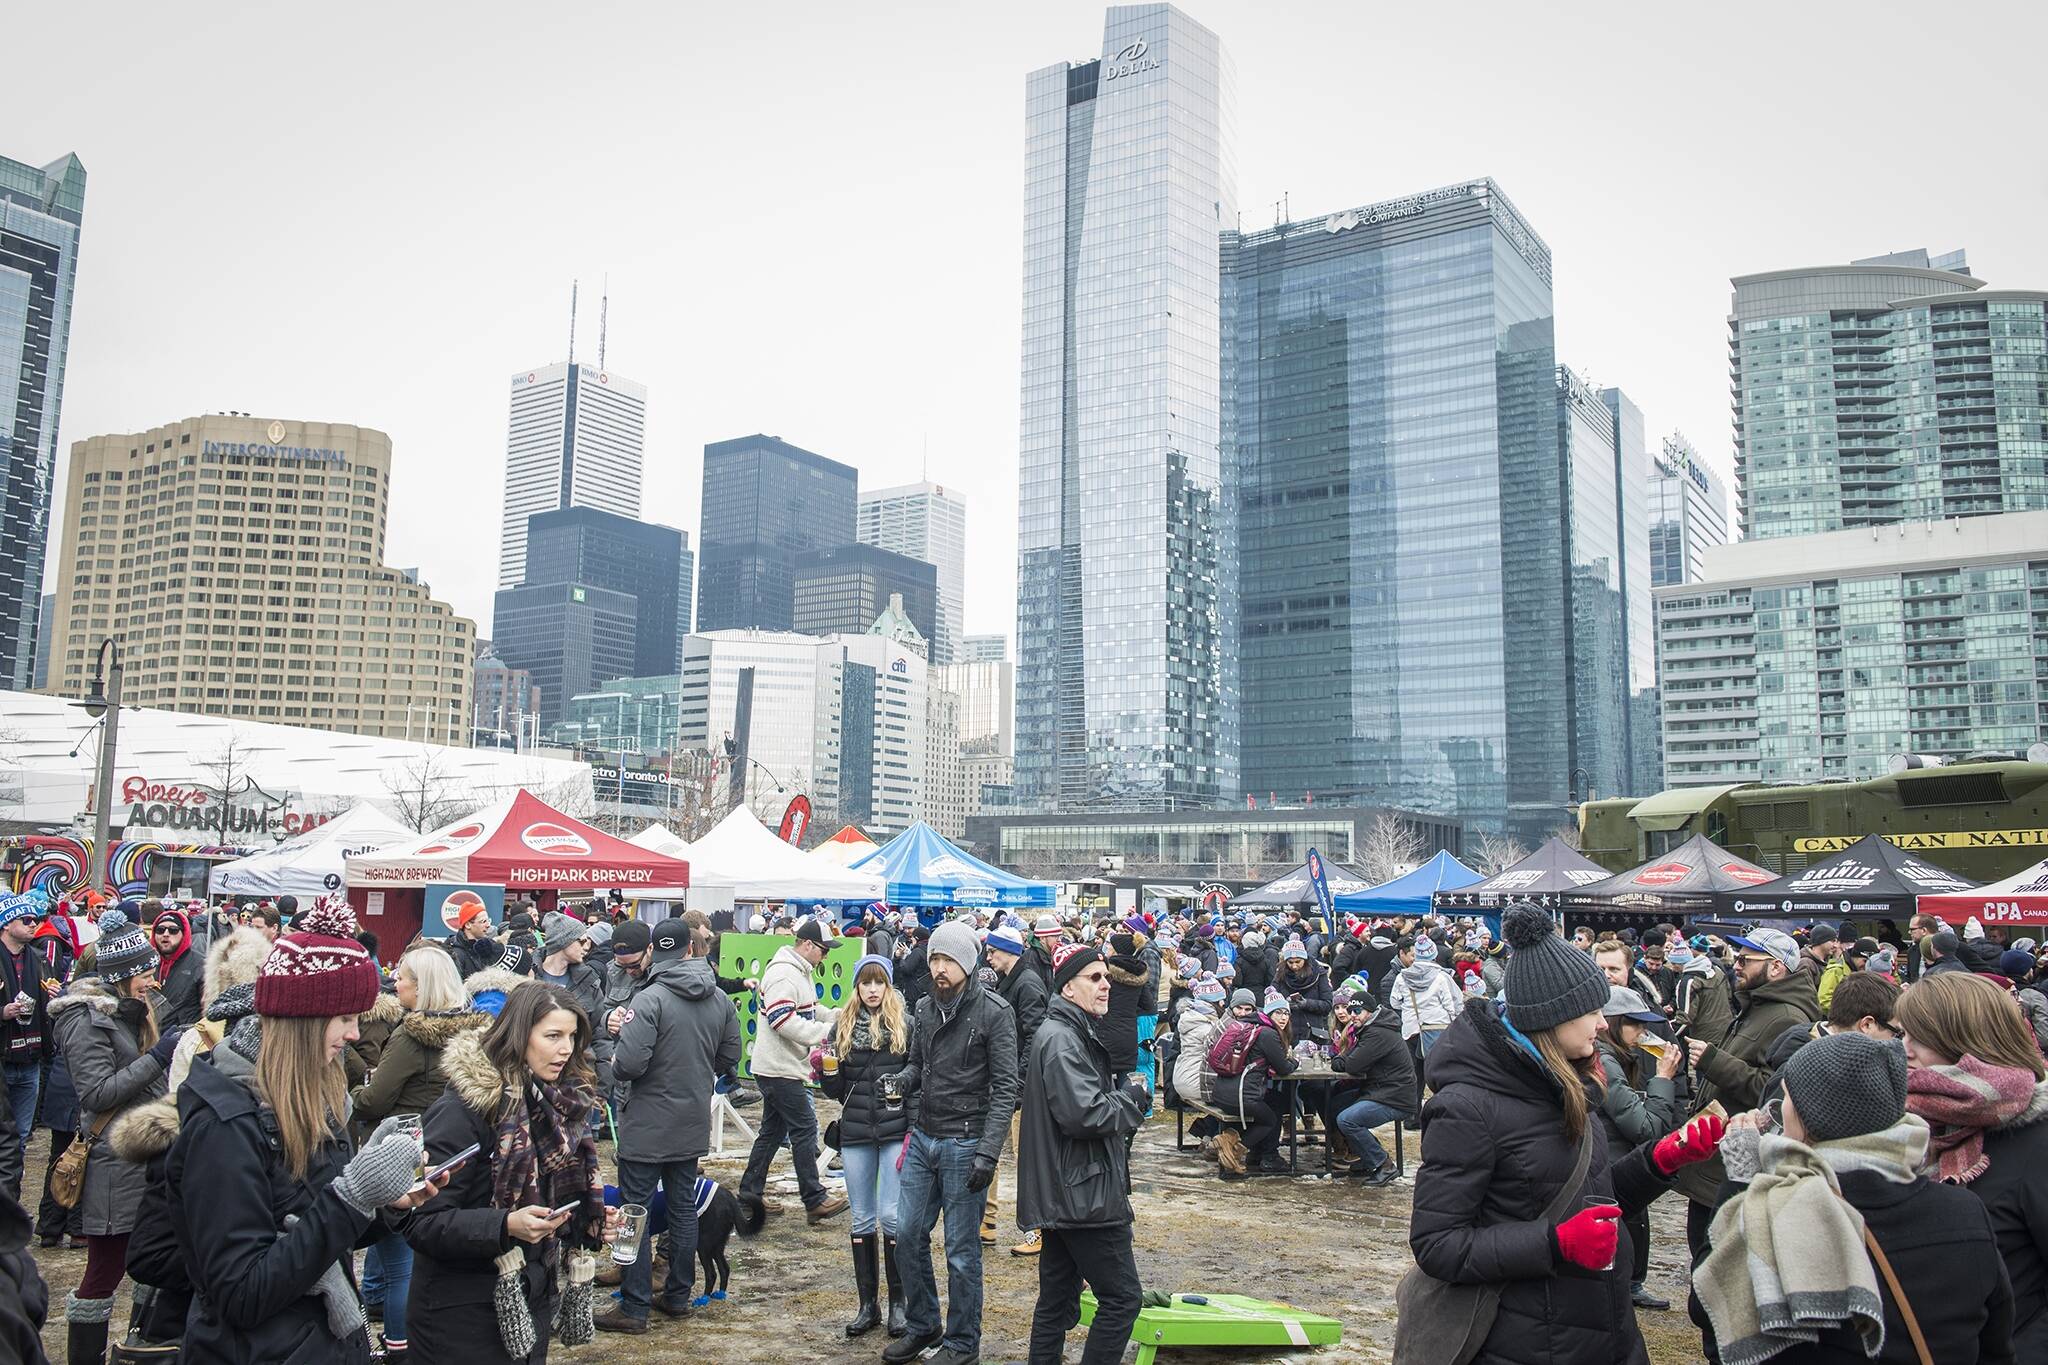 roundhouse winter craft beer festival toronto